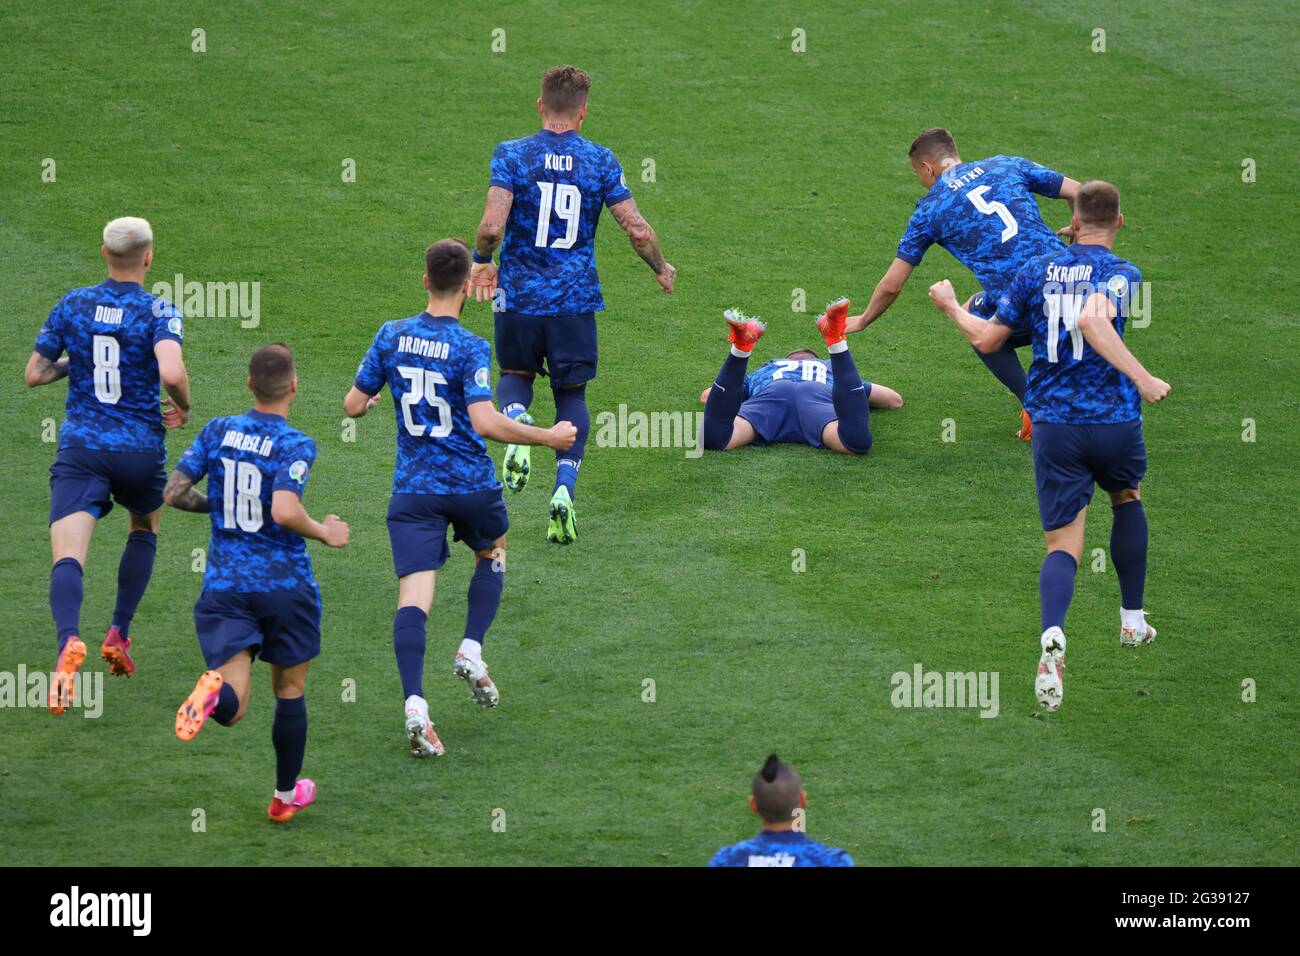 Saint Petersburg, Russia. 14th June, 2021. Ondrej Duda (8), Robert Mak (20), Milan Skriniar (14) of Slovakia are seen in action during the European championship EURO 2020 between Poland and Slovakia at Gazprom Arena.(Final Score; Poland 1:2 Slovakia). Credit: SOPA Images Limited/Alamy Live News Stock Photo